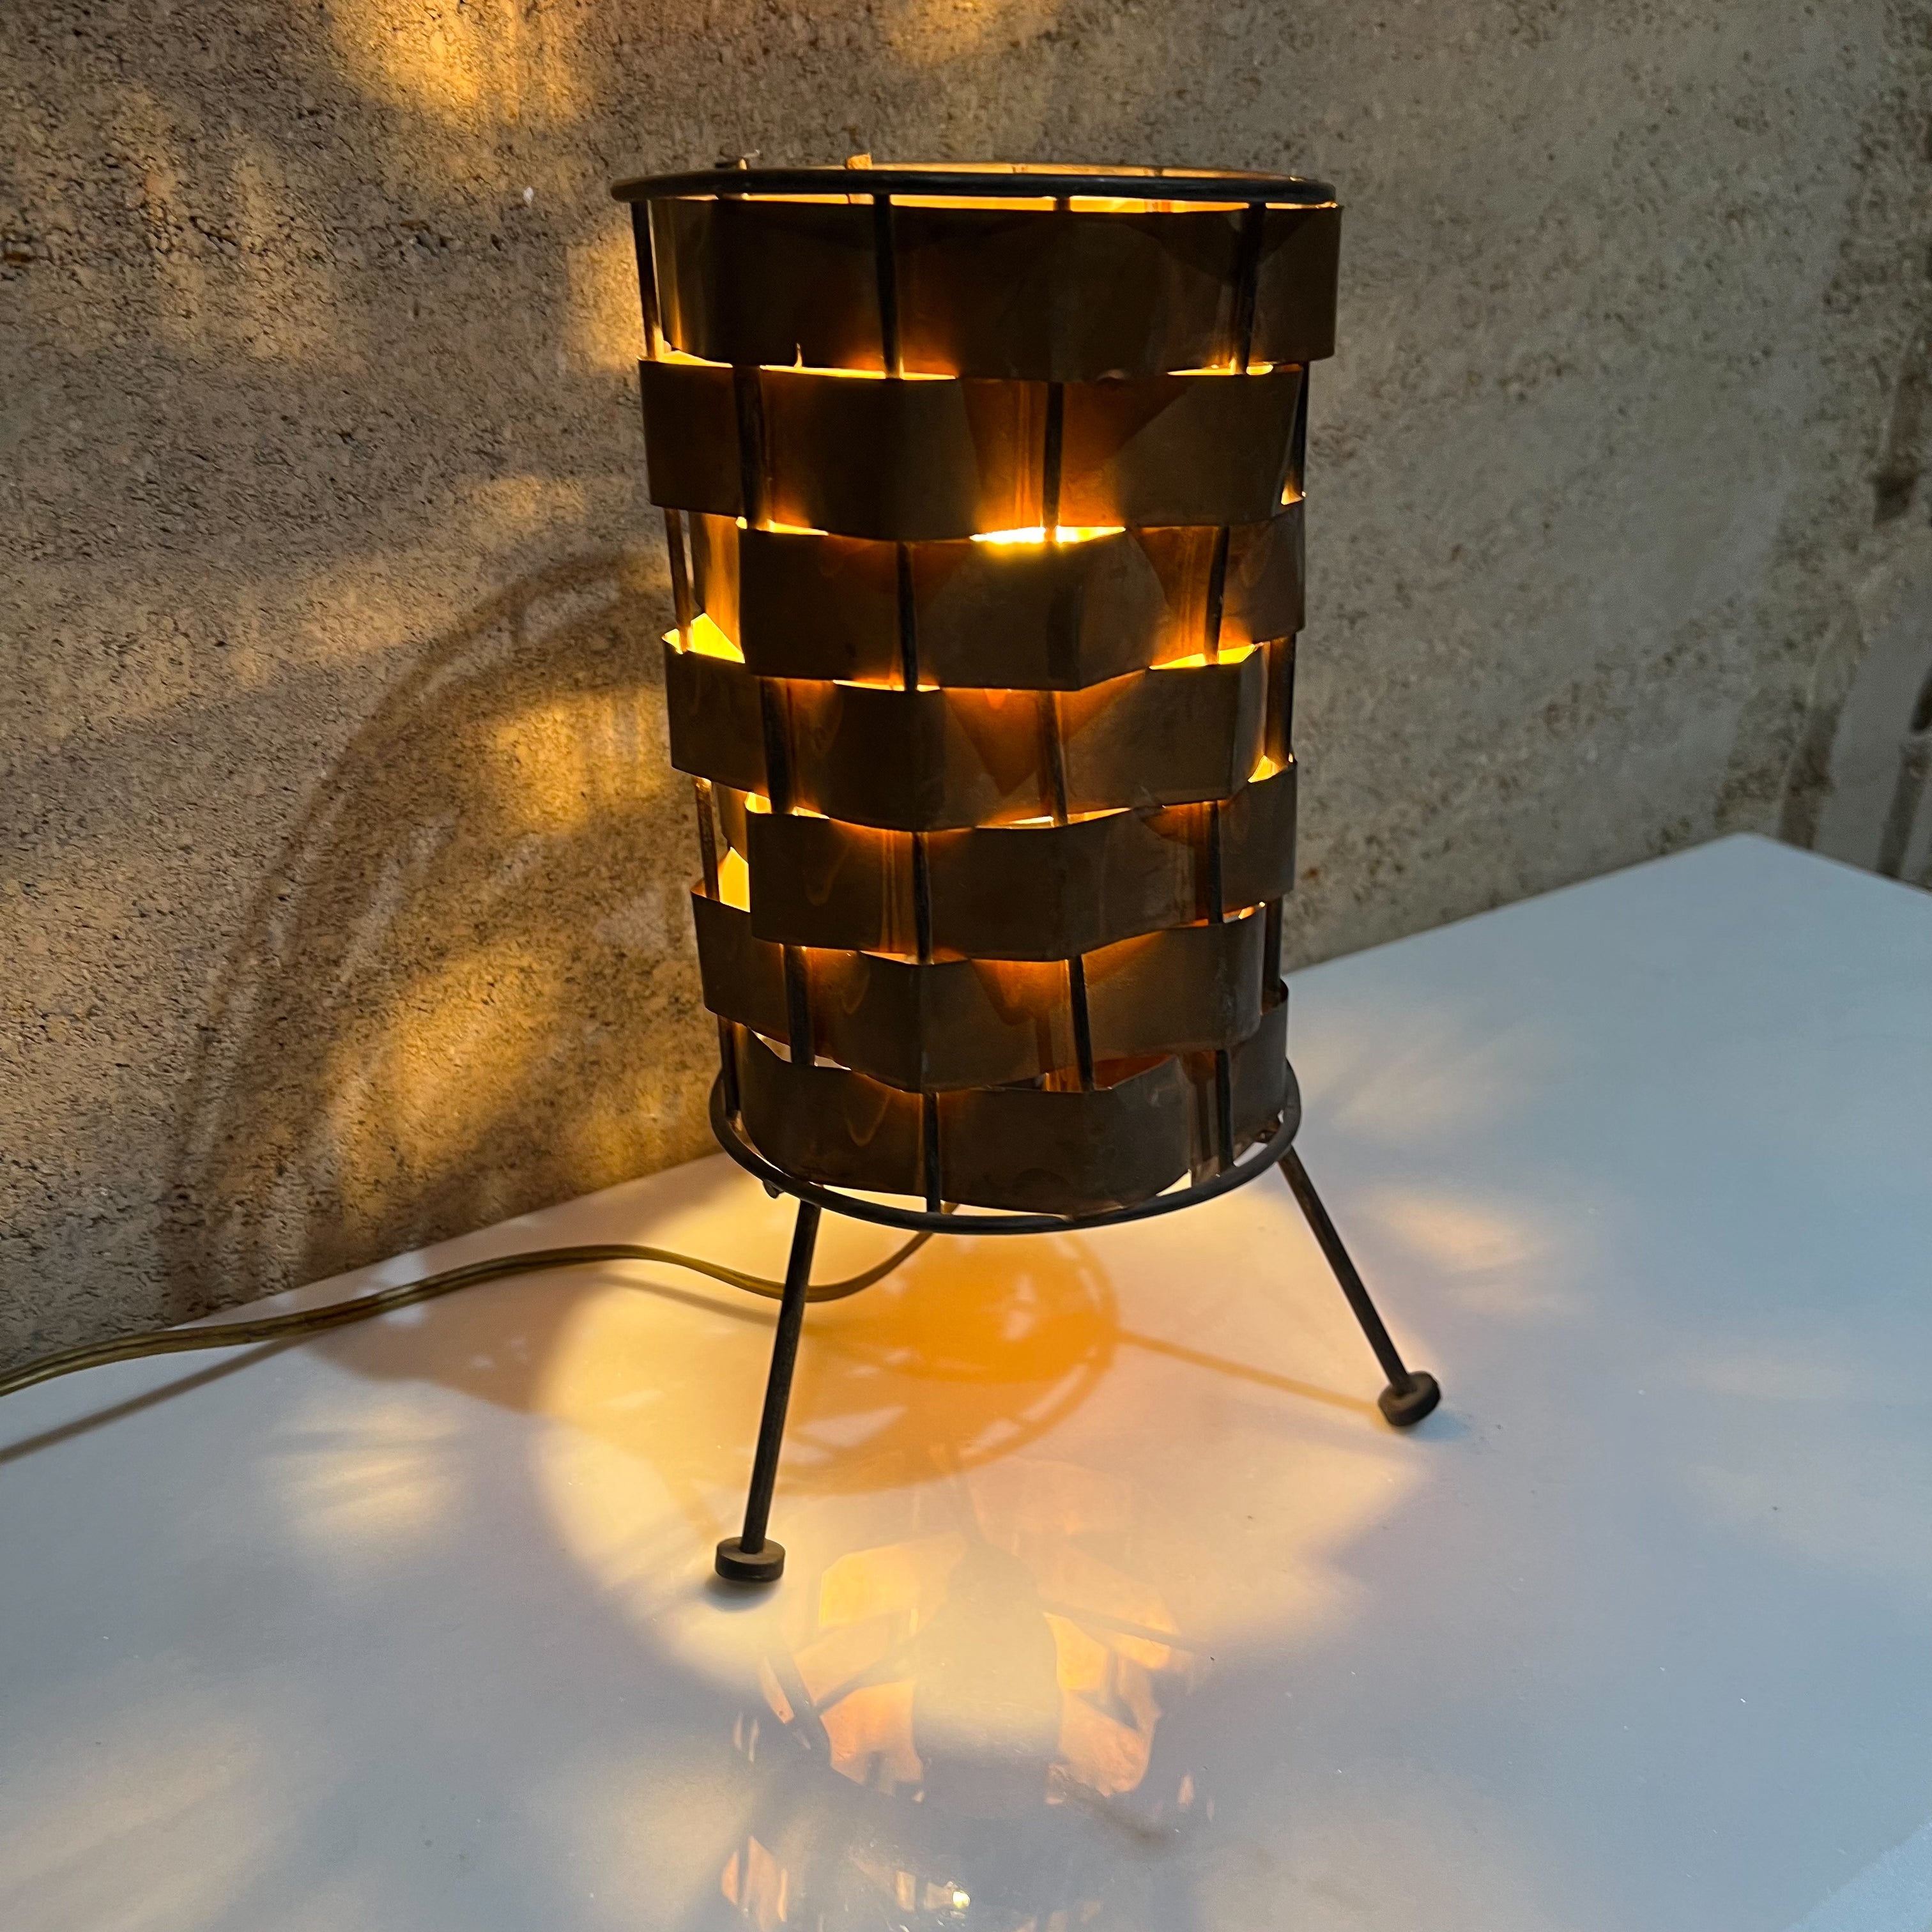 1950s Fabulous corrugated copper patchwork table lamp black iron tripod base.
10.25 tall diameter 6.5 bottom, 5.25 top.
Preowned unrestored vintage condition.
See images provided.